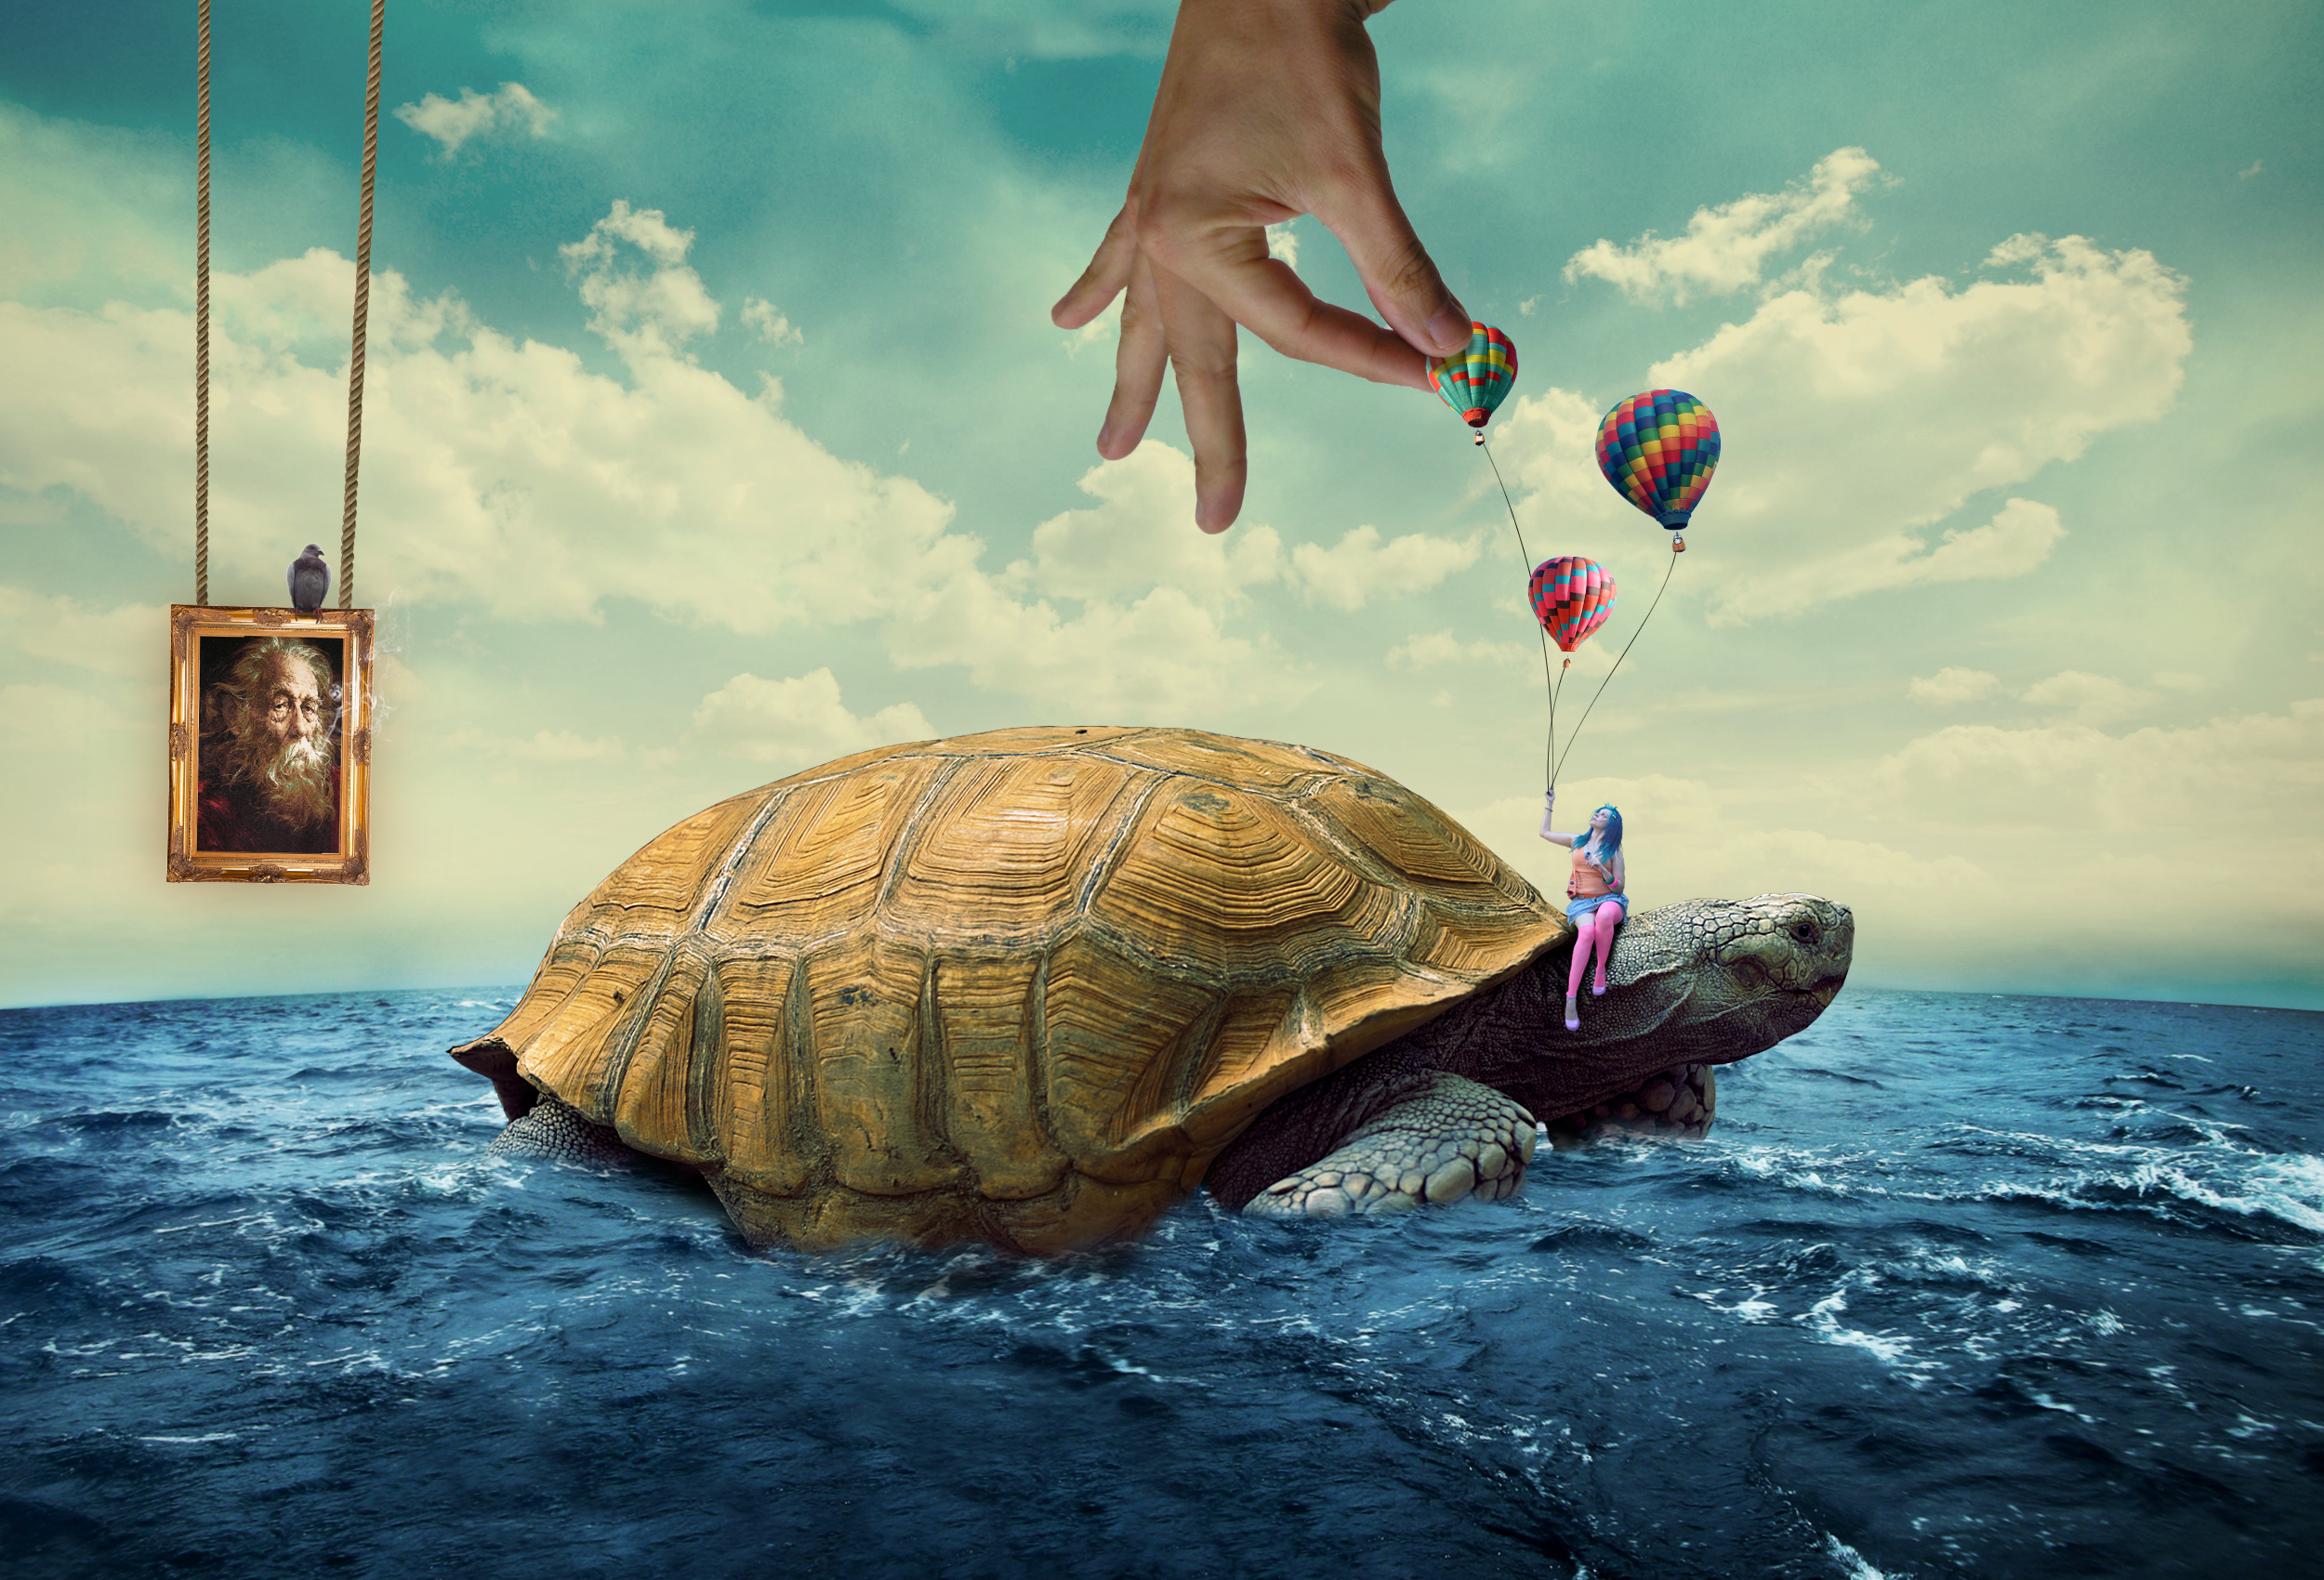 General 2500x1700 digital art artwork surreal animals sea turtle hot air balloons women painting hands picture frames photoshopped clouds blue hair pigeons